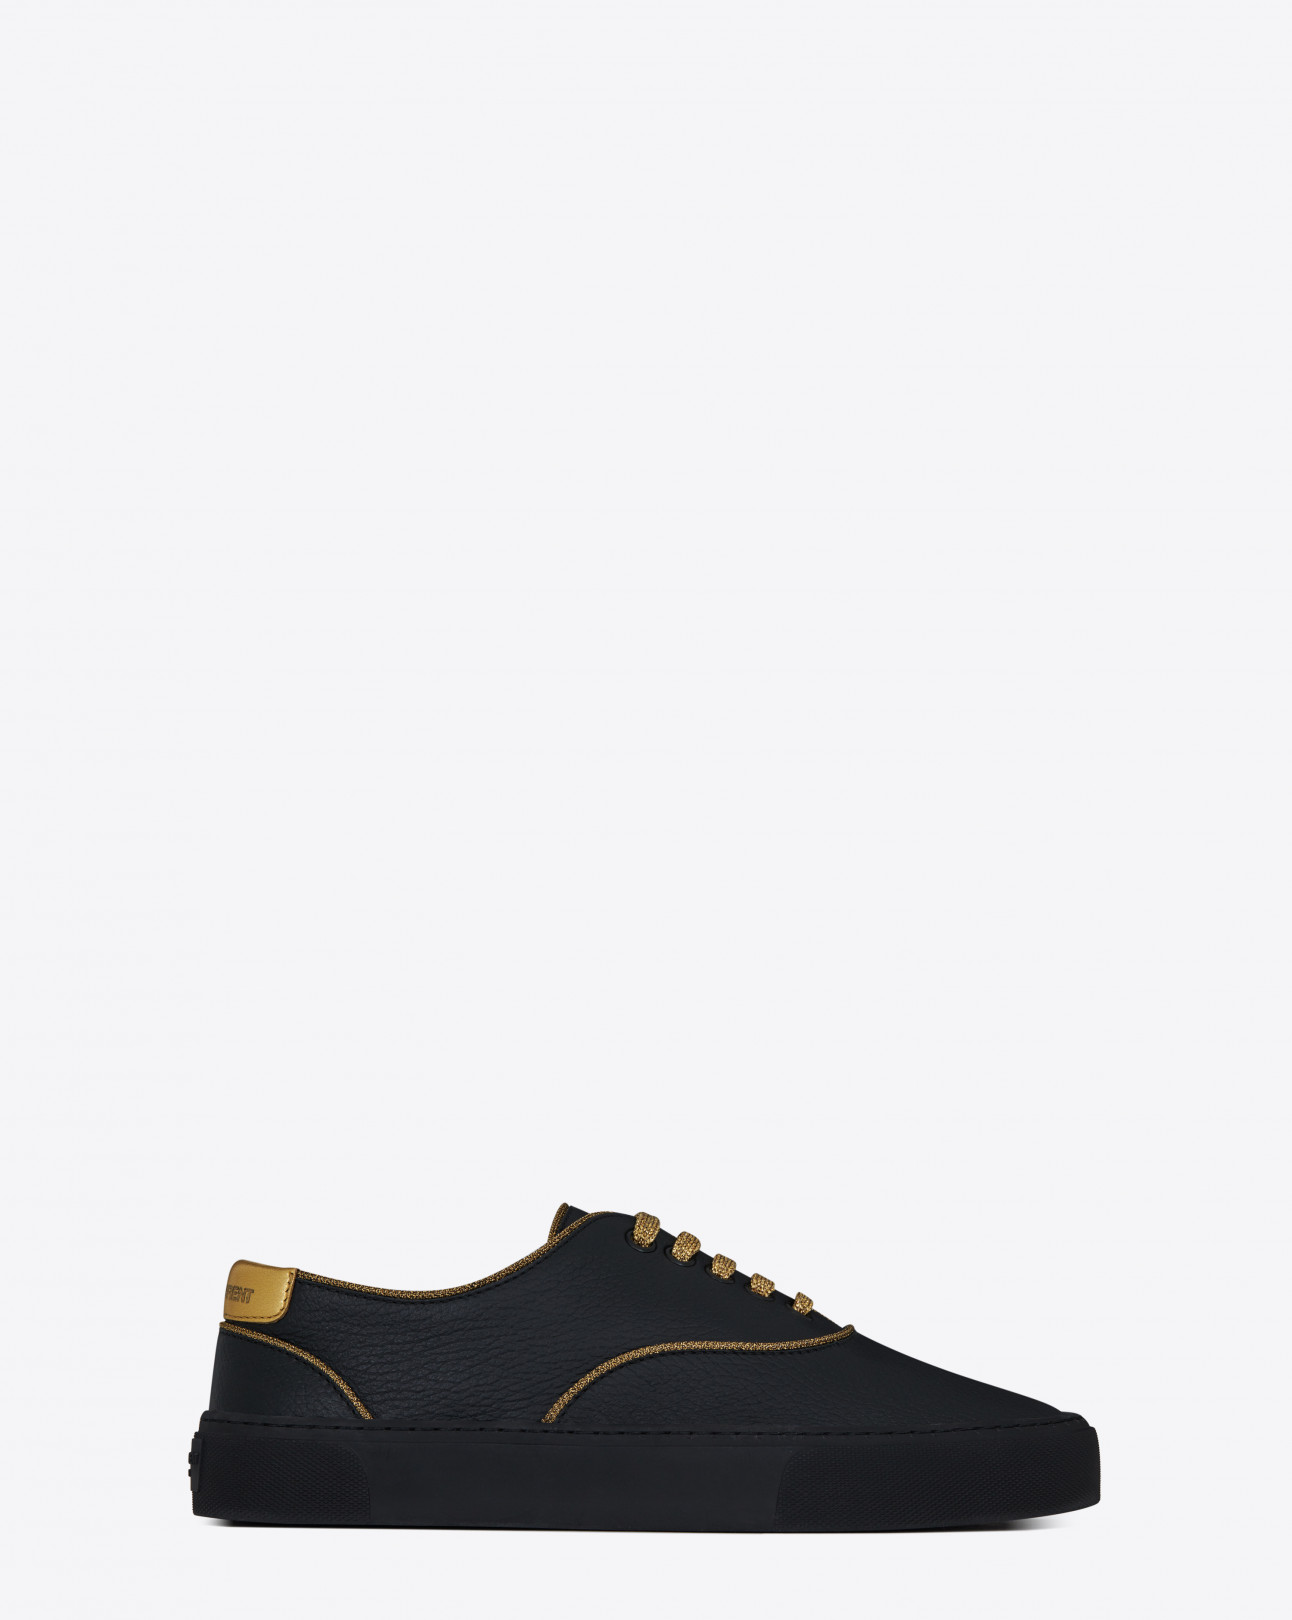 VENICE LOW TOP SNEAKER IN BLACK GRAINED CALFSKIN LEATHER AND GOLD LEATHER WITH GOLD PIPING AND LACES（6万円）